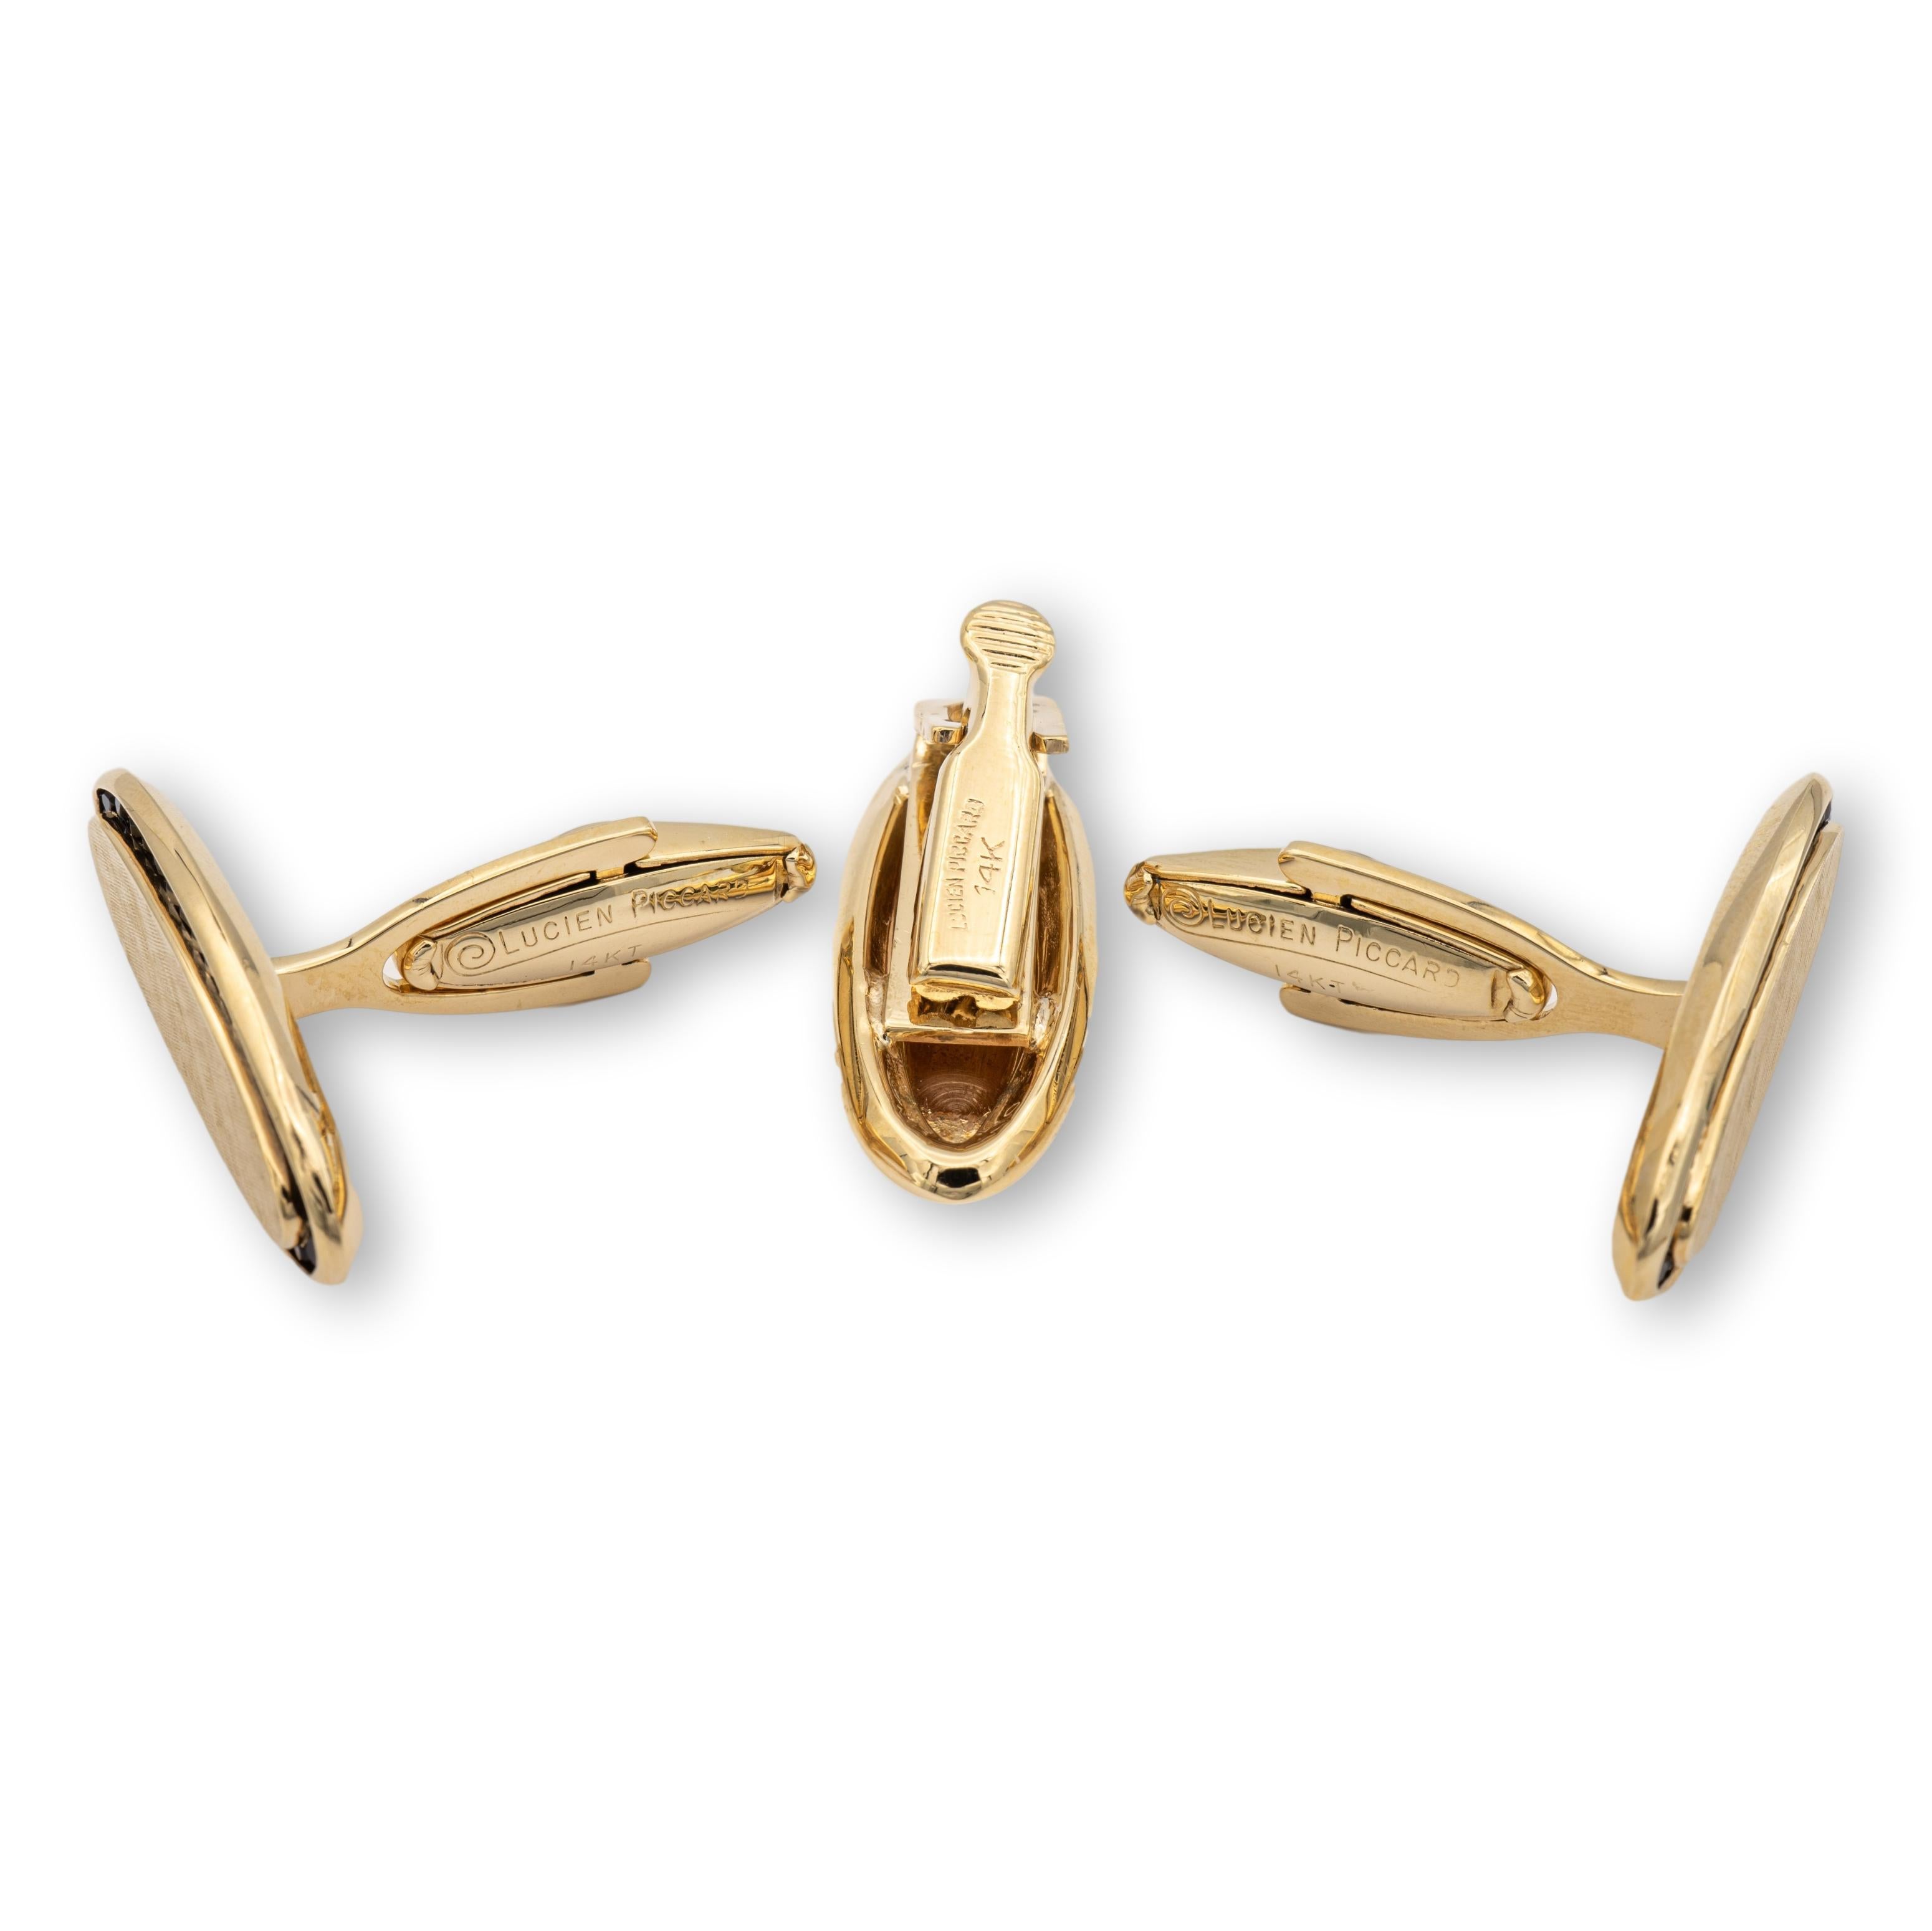 A set of vintage men's cufflinks and tie clip by famous watchmaker Lucien Piccard finely crafted in 14 karat yellow gold each featuring a rim of channel set garnets in an elongated oval face with a satin finish in the center and whale backs. The tie